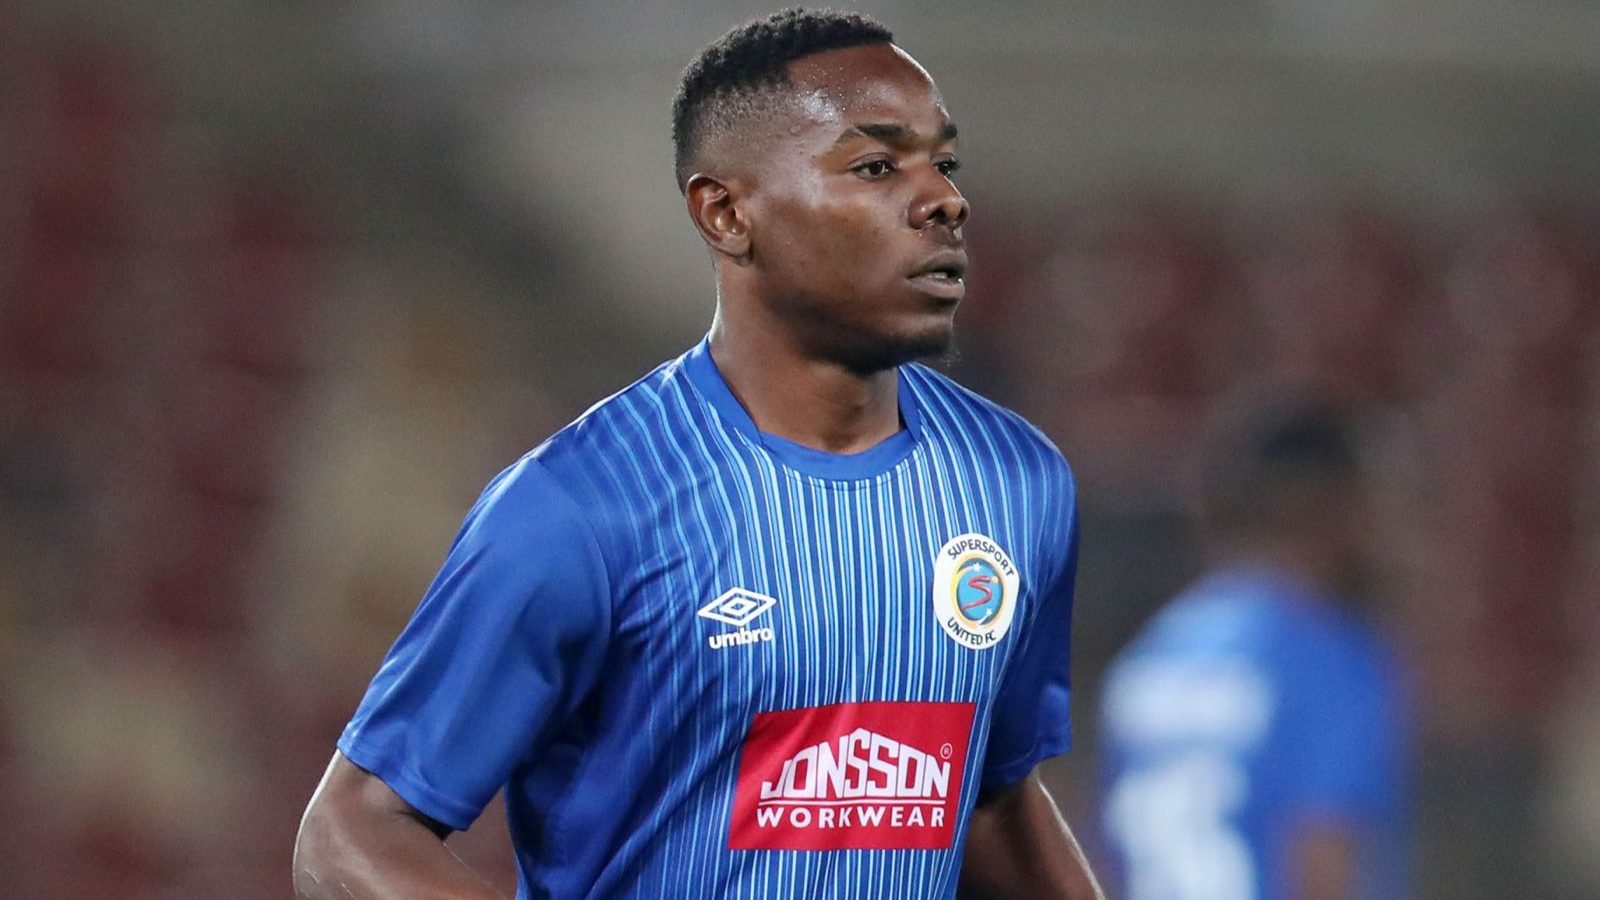 SuperSport United defender Abdulrazack Mohamed Hamza faces a surprise exit from the club